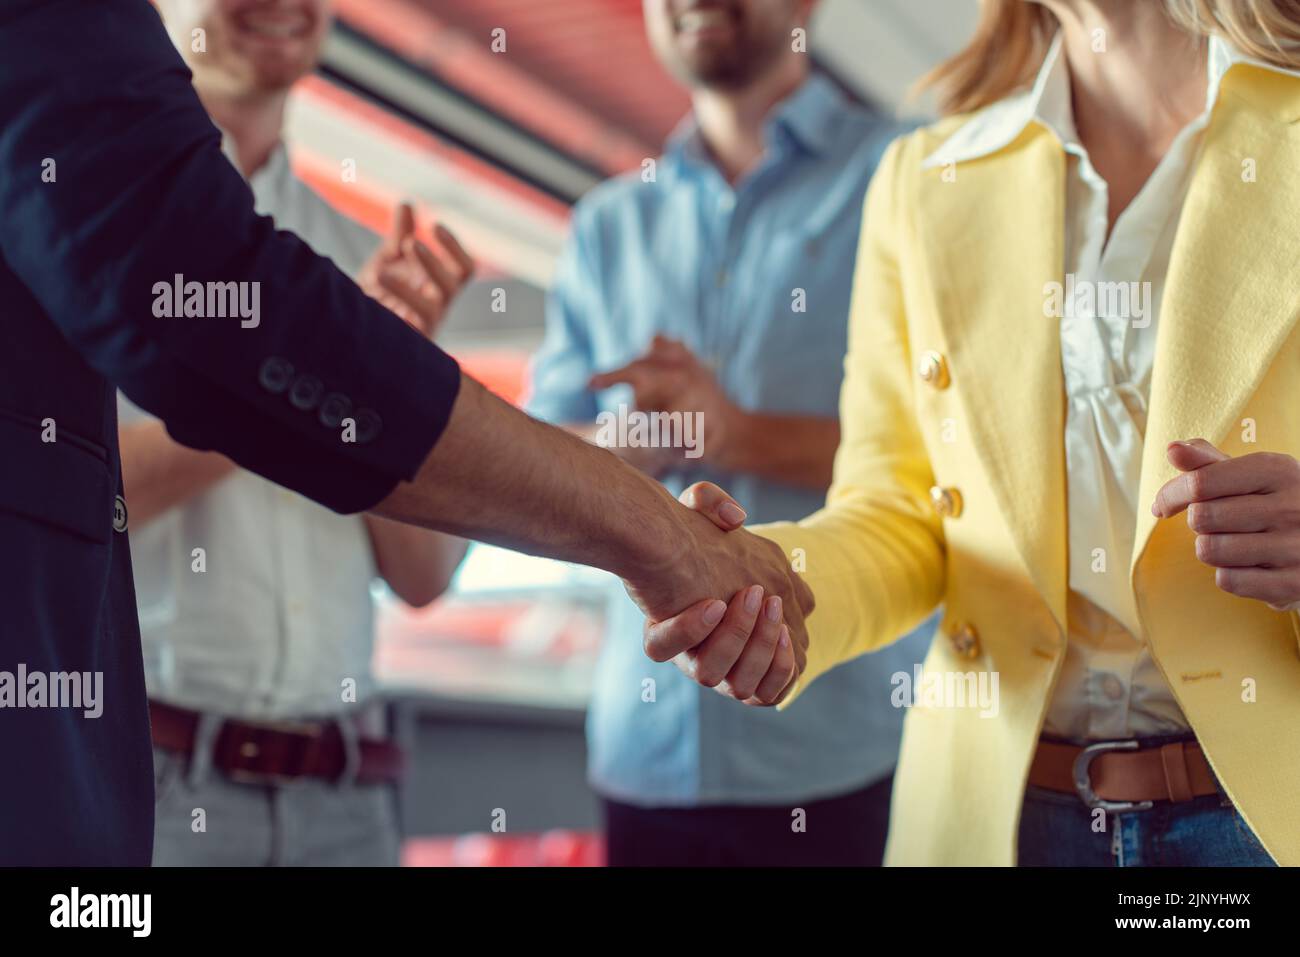 Closing of a business deal by shaking hands in agreement Stock Photo